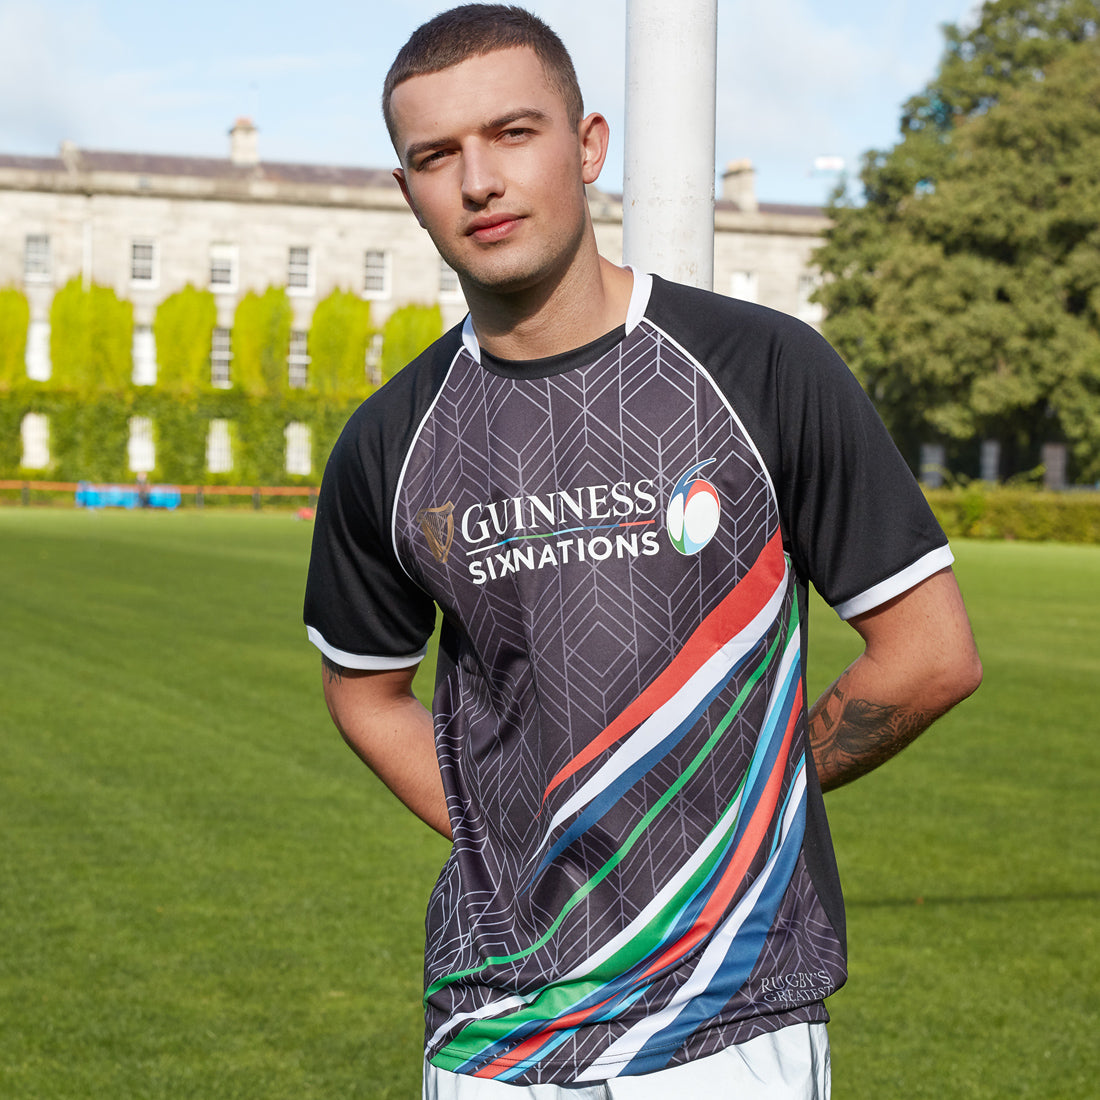 A rugby fan wearing a Guinness Six Nations performance tee stands beside a rugby goal post, with a historical building in the background.